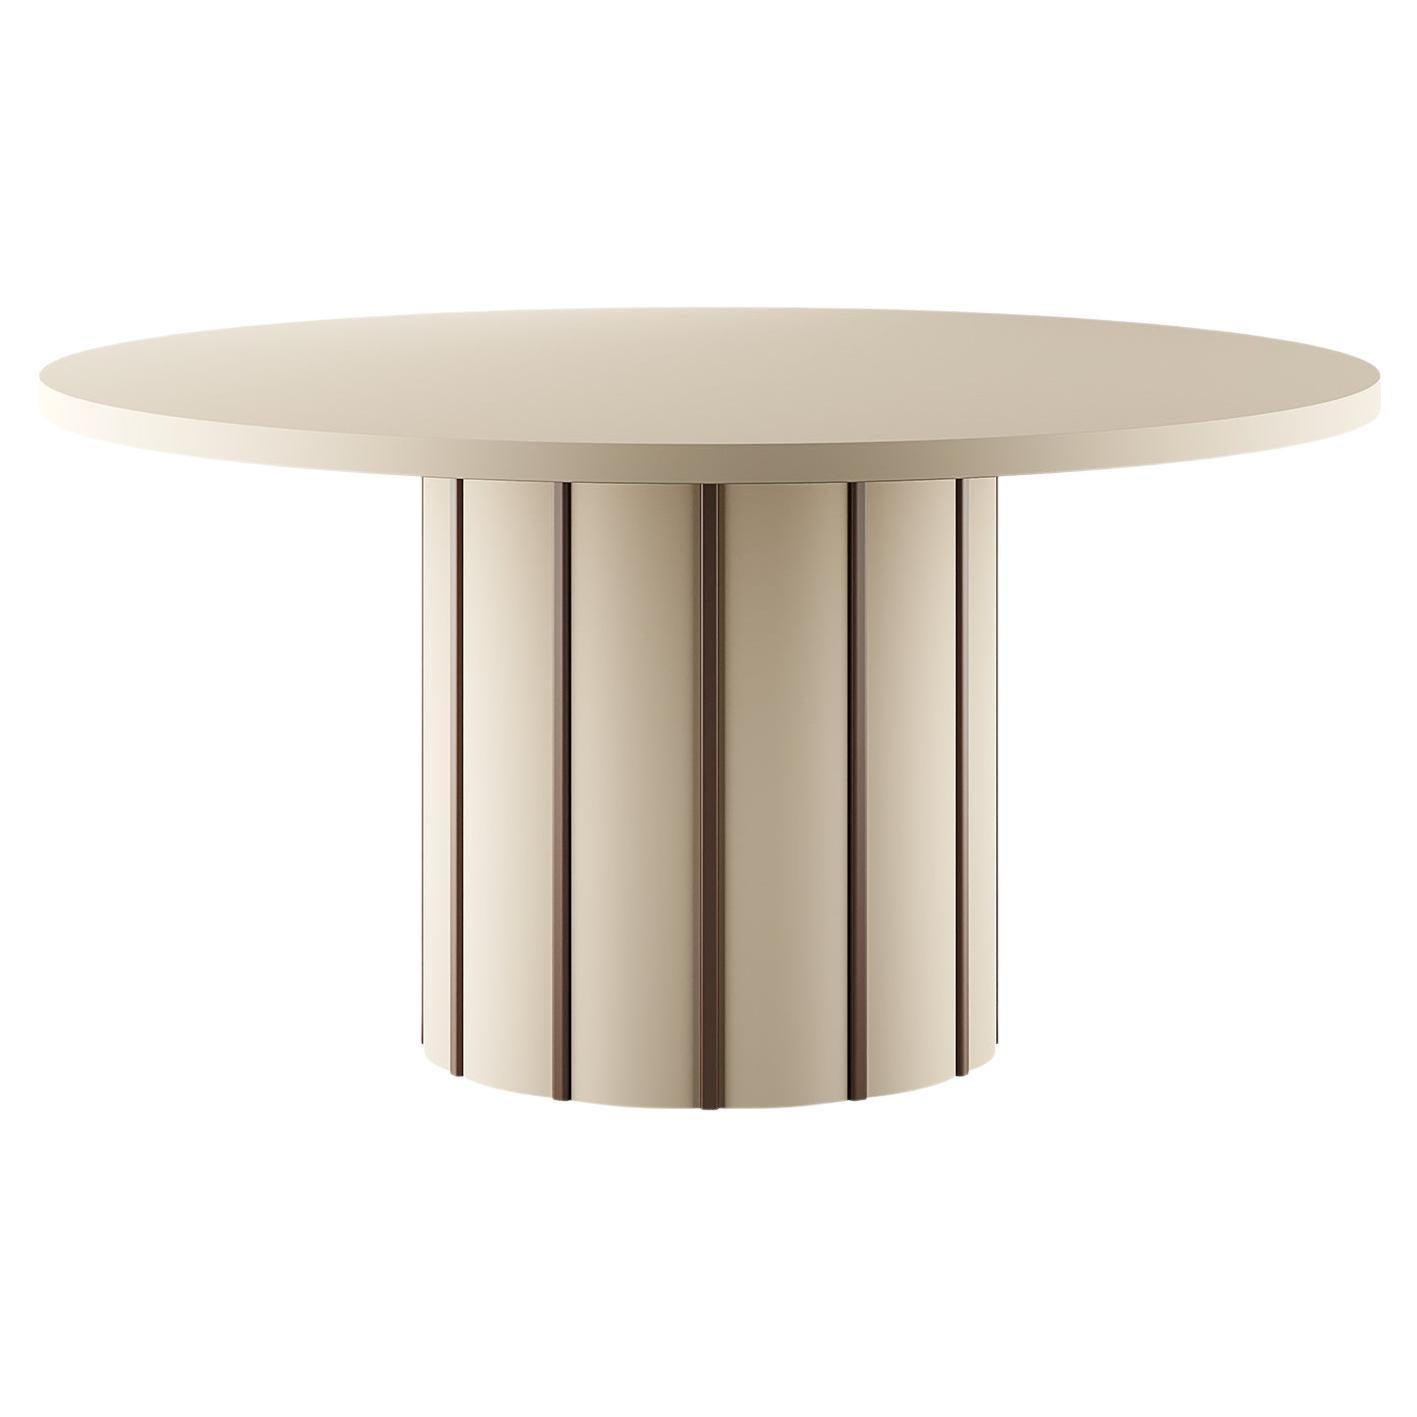 Contemporary Burtalist Micro-Cement Round Dining Table Pedestal Sand Color For Sale